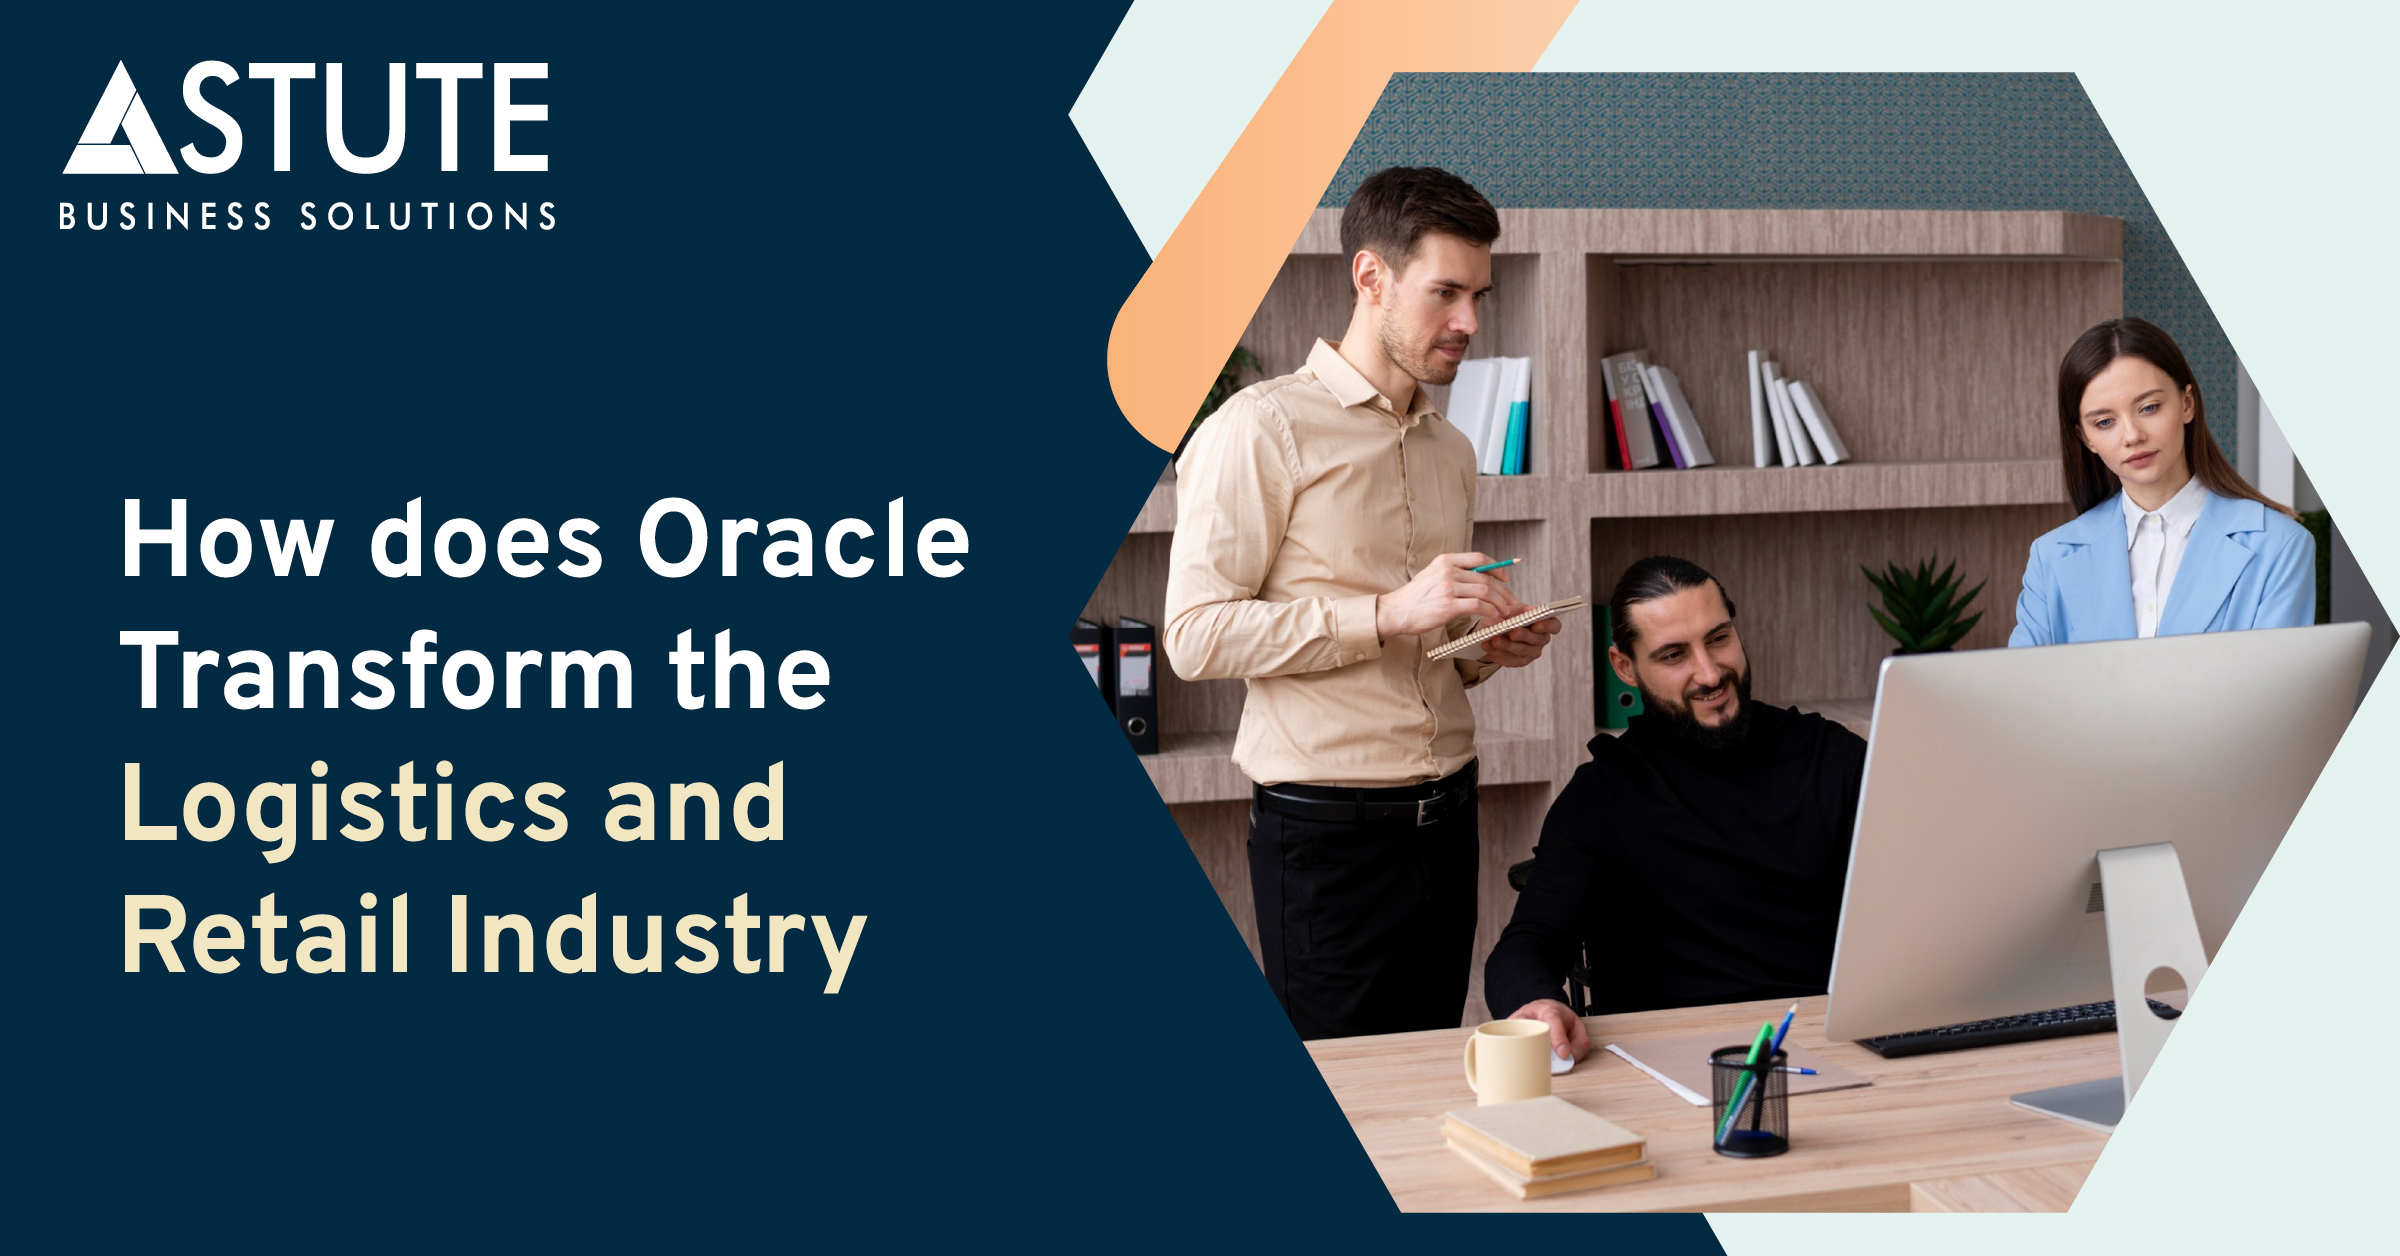 How does Oracle transform the logistics and retail industry?